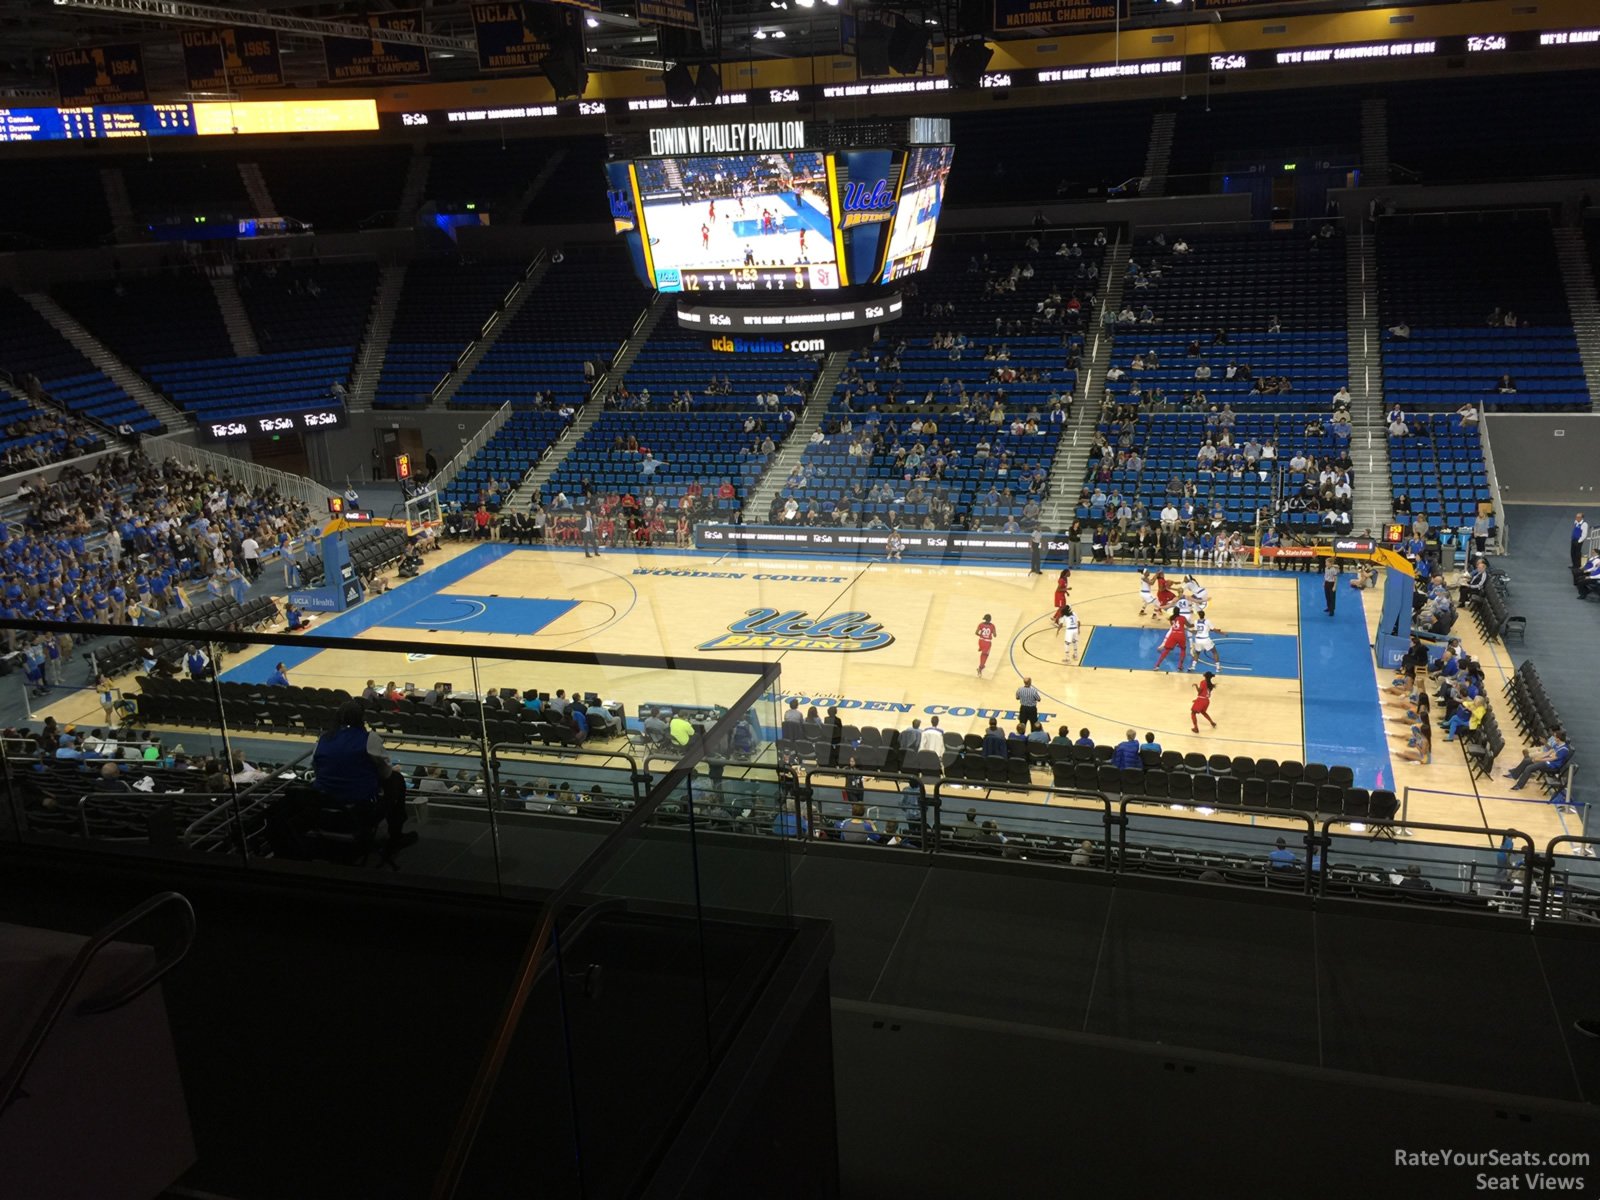 section 214, row 6 seat view  - pauley pavilion